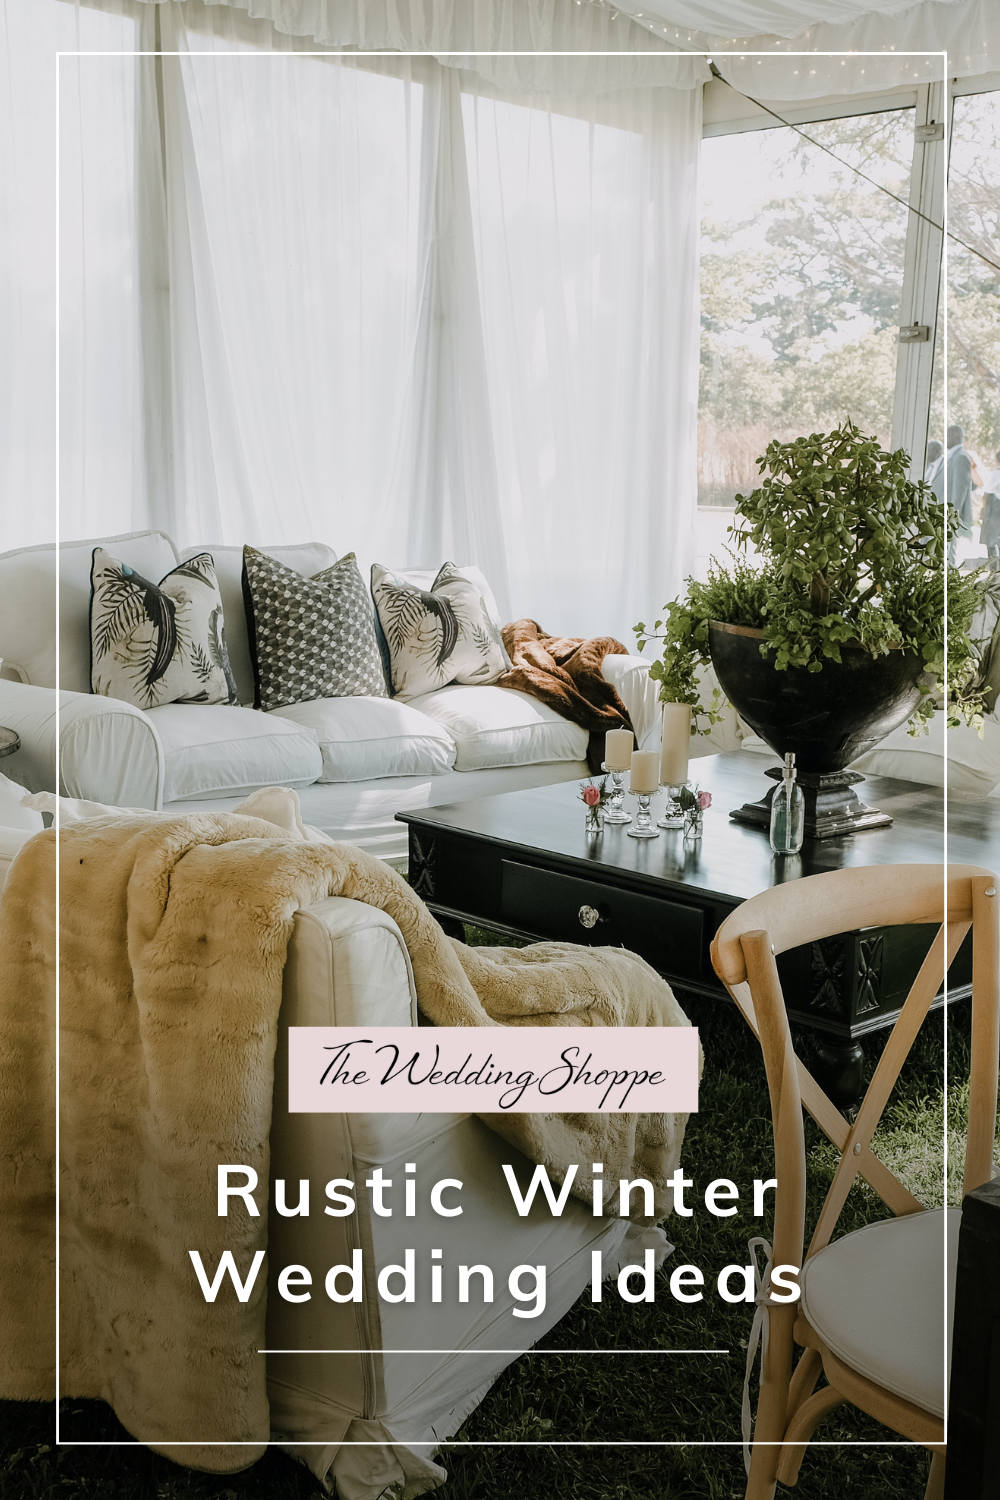 blog post graphic for "Rustic Winter Wedding Ideas" by The Wedding Shoppe